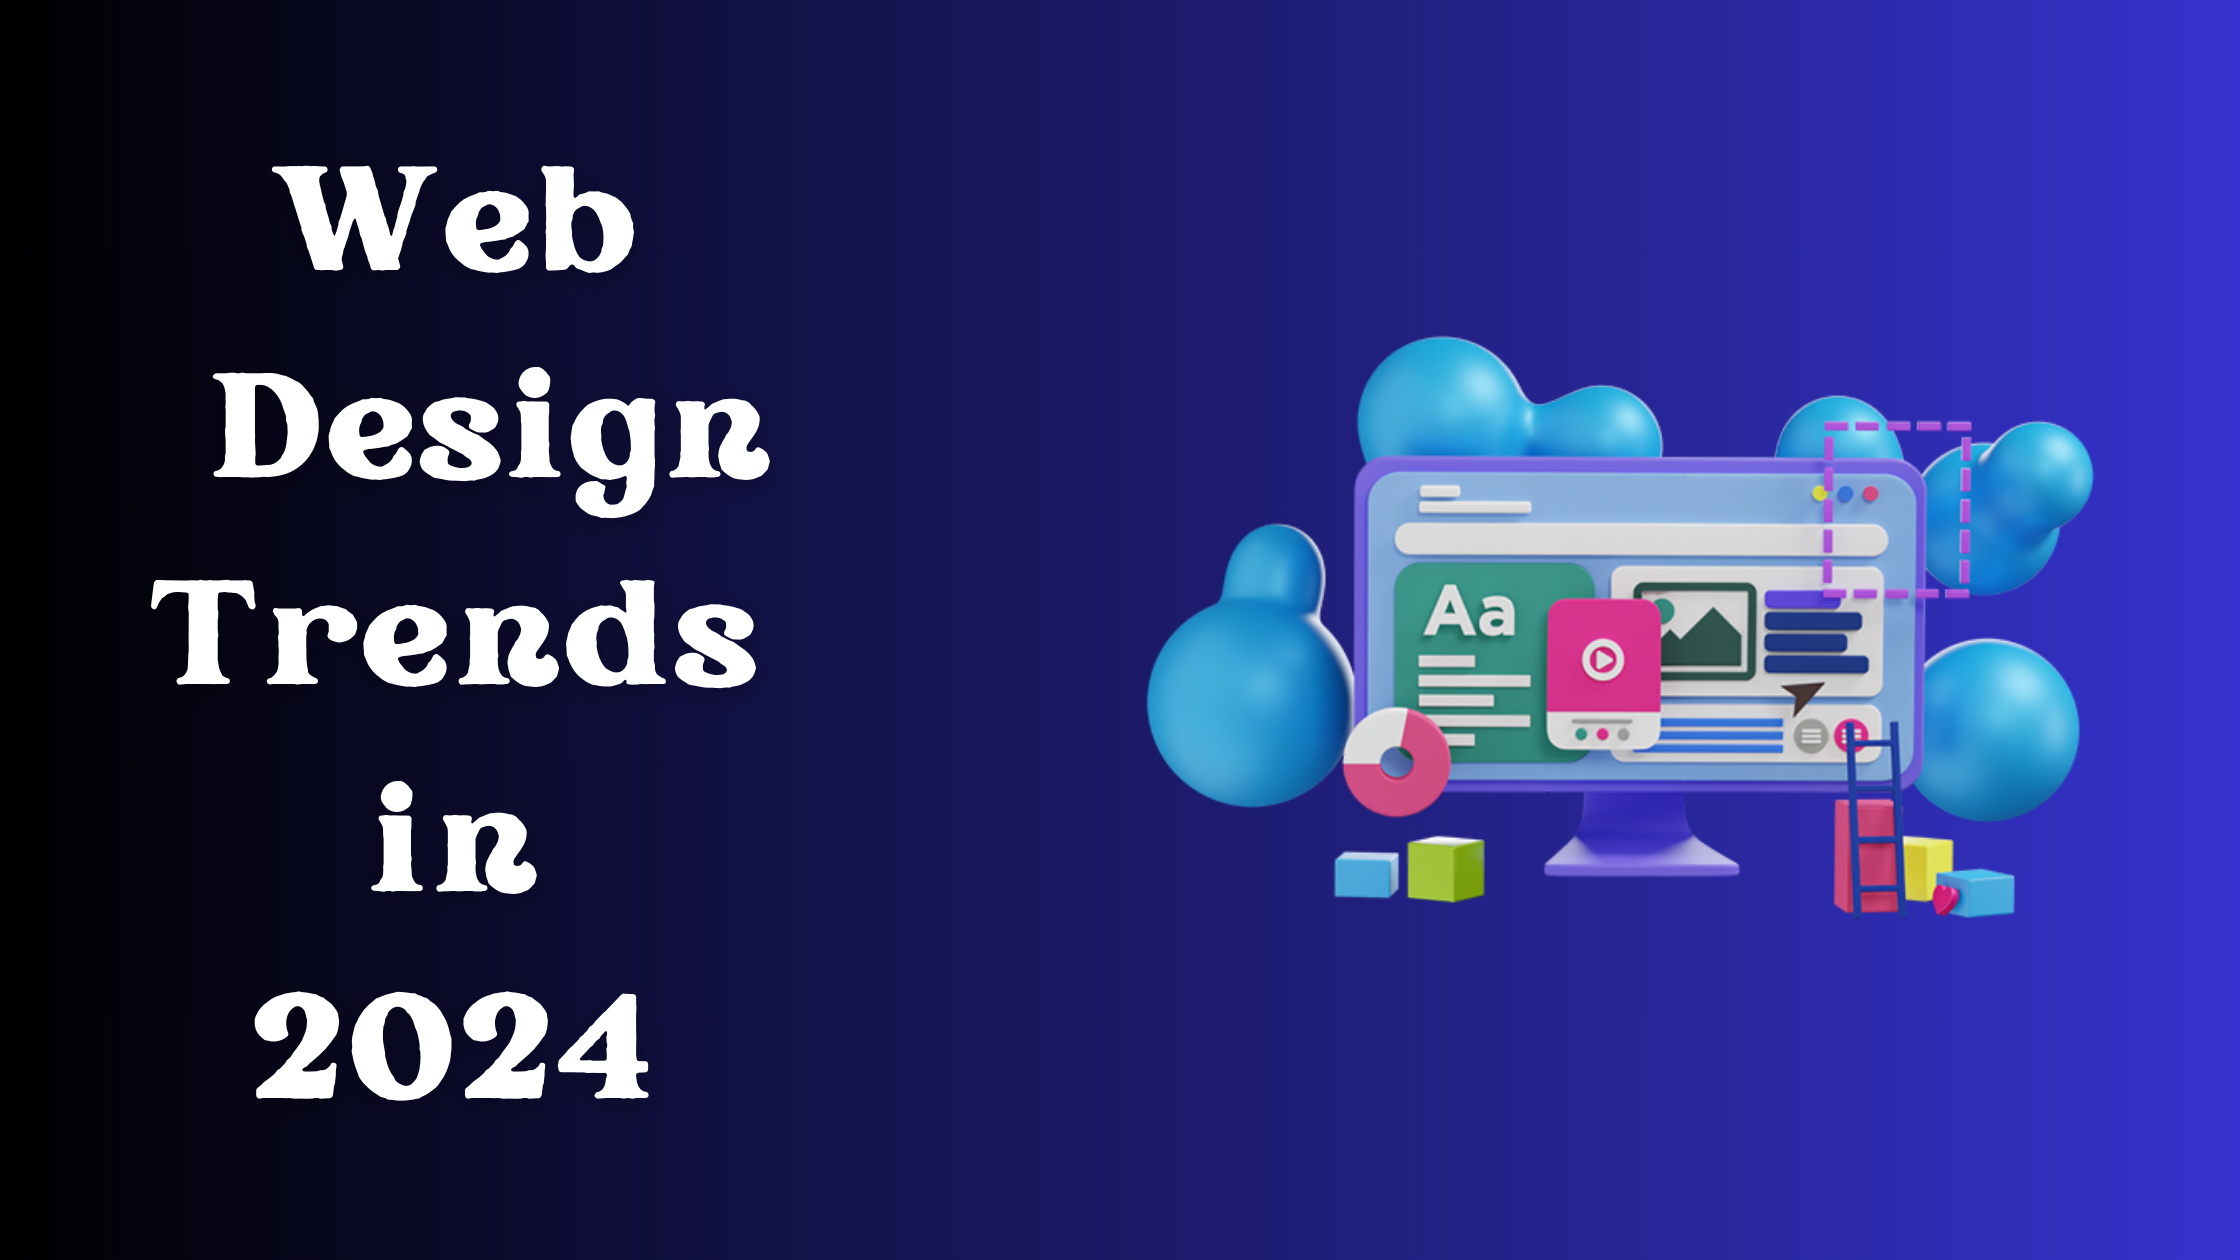 Web Design Trends to Watch in 2024